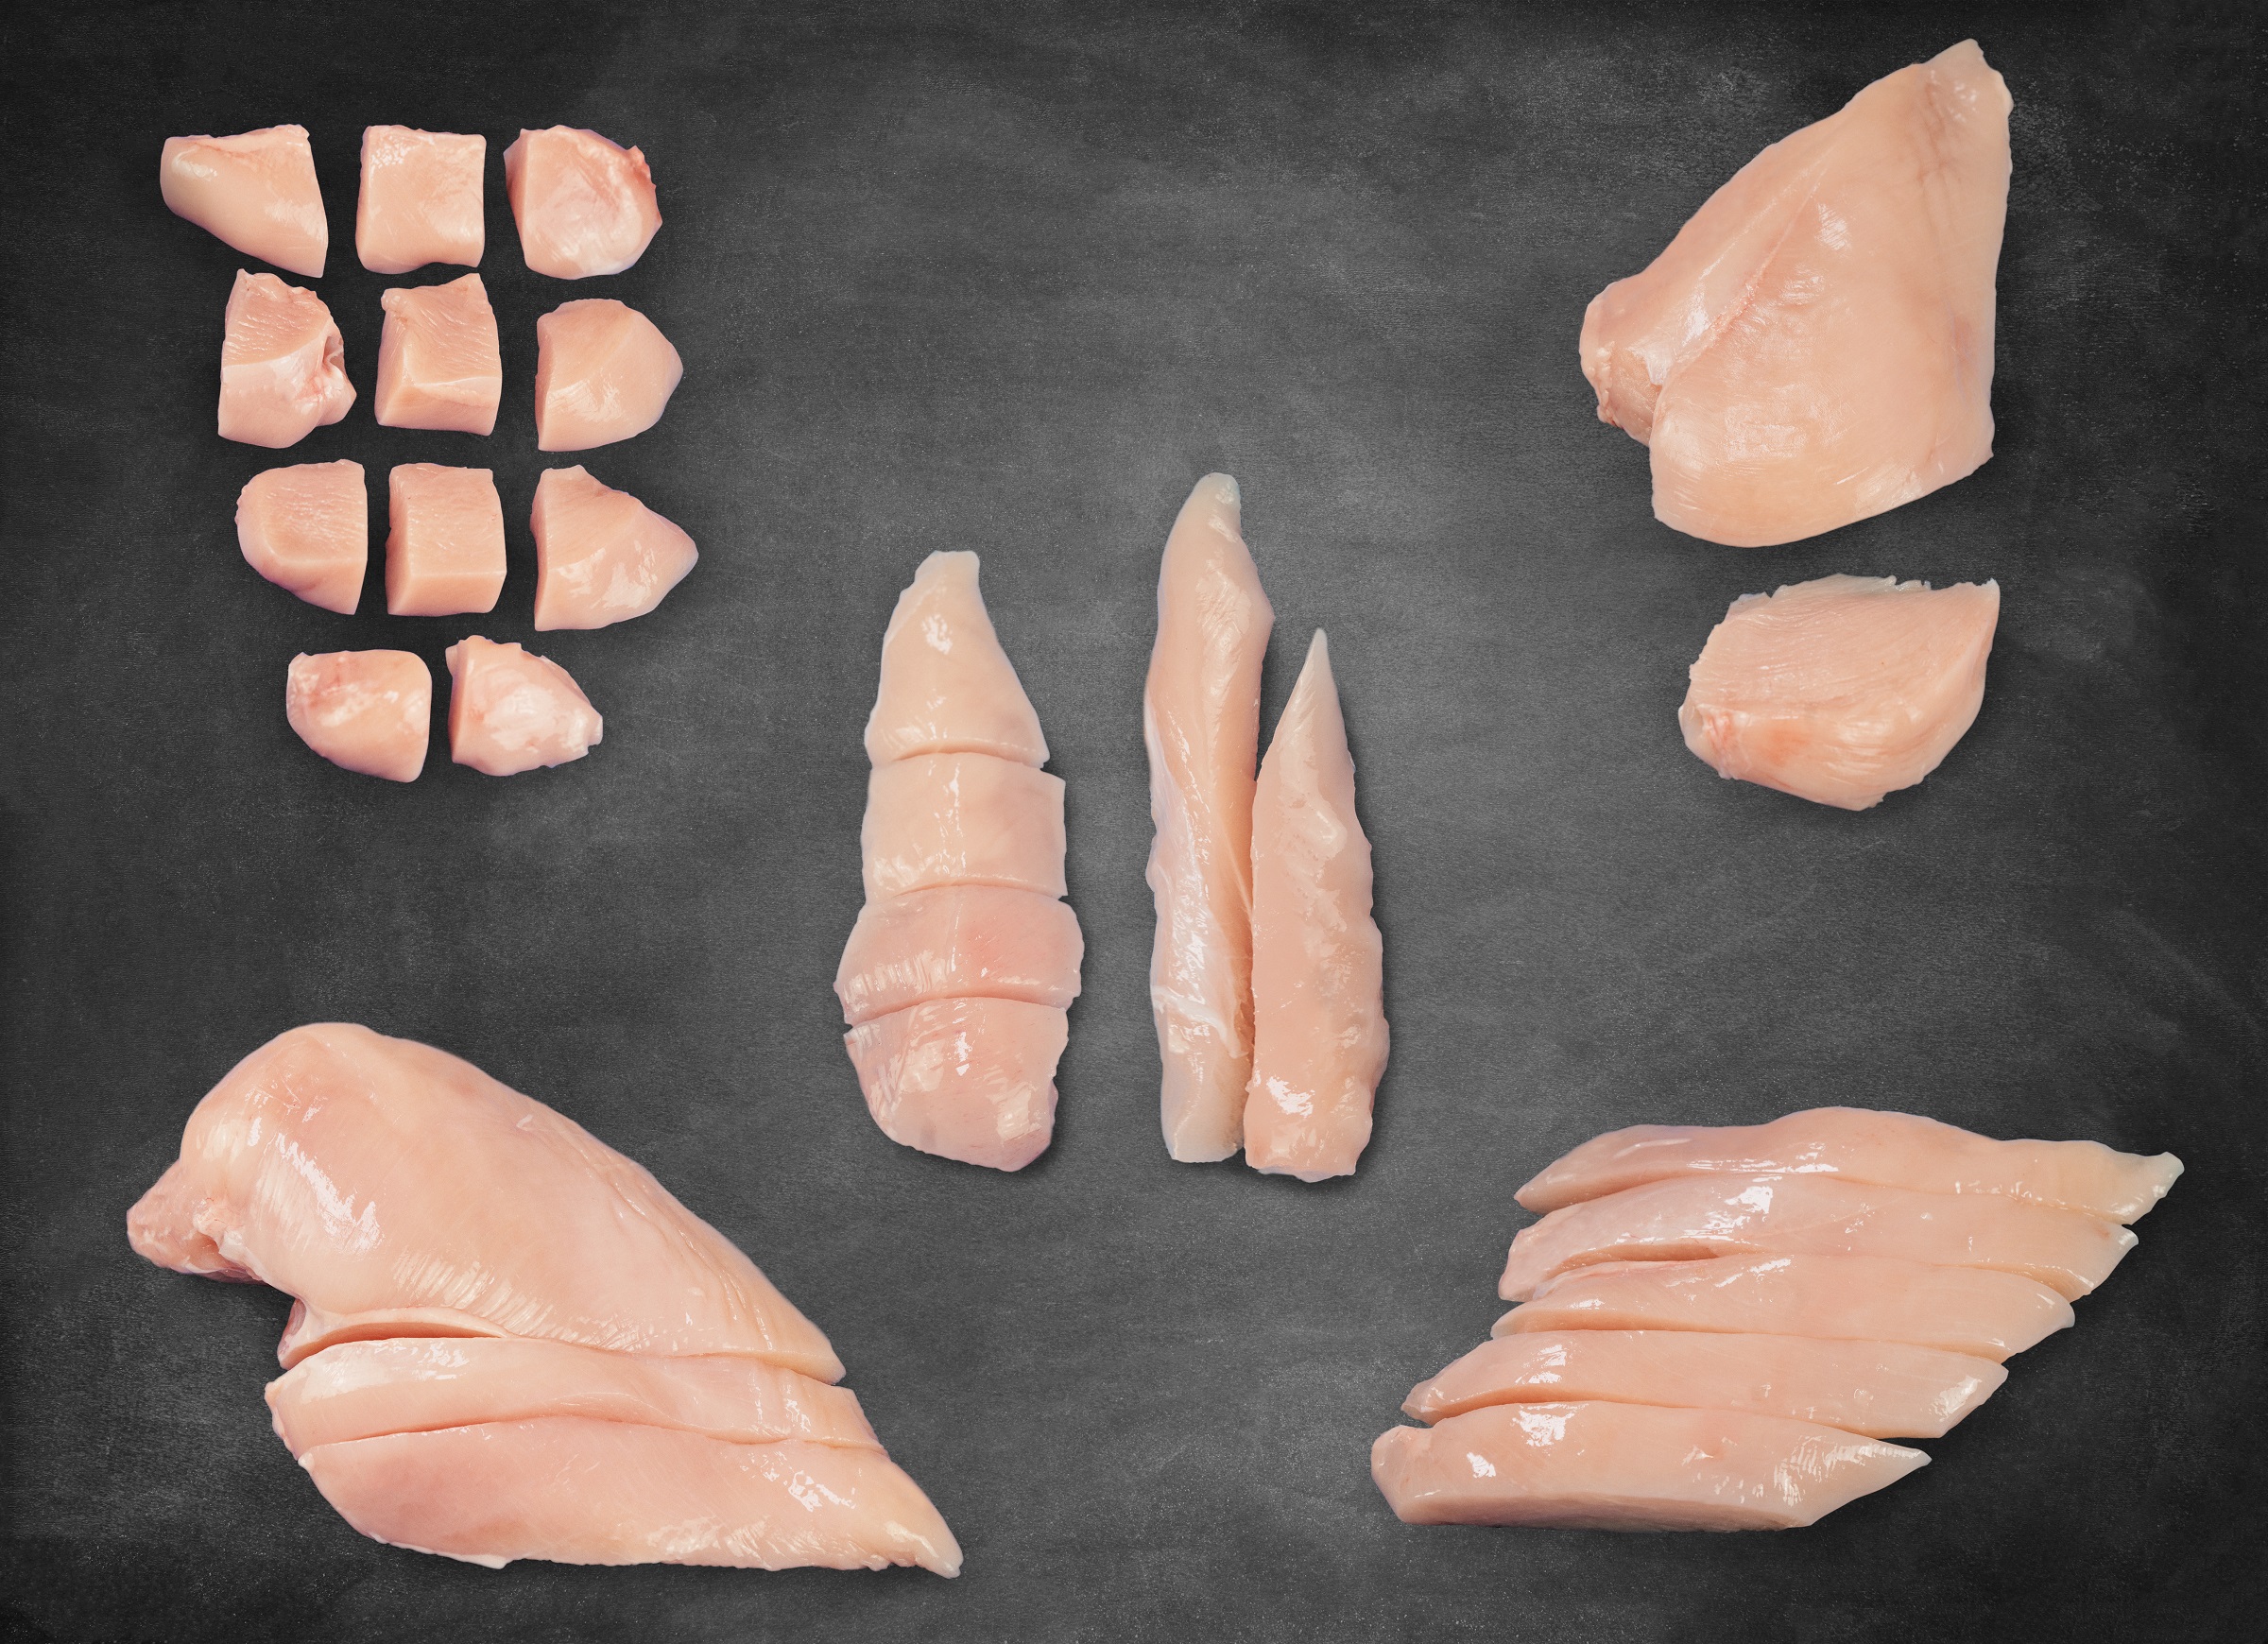 6 questions about high-volume chicken fillet portioning